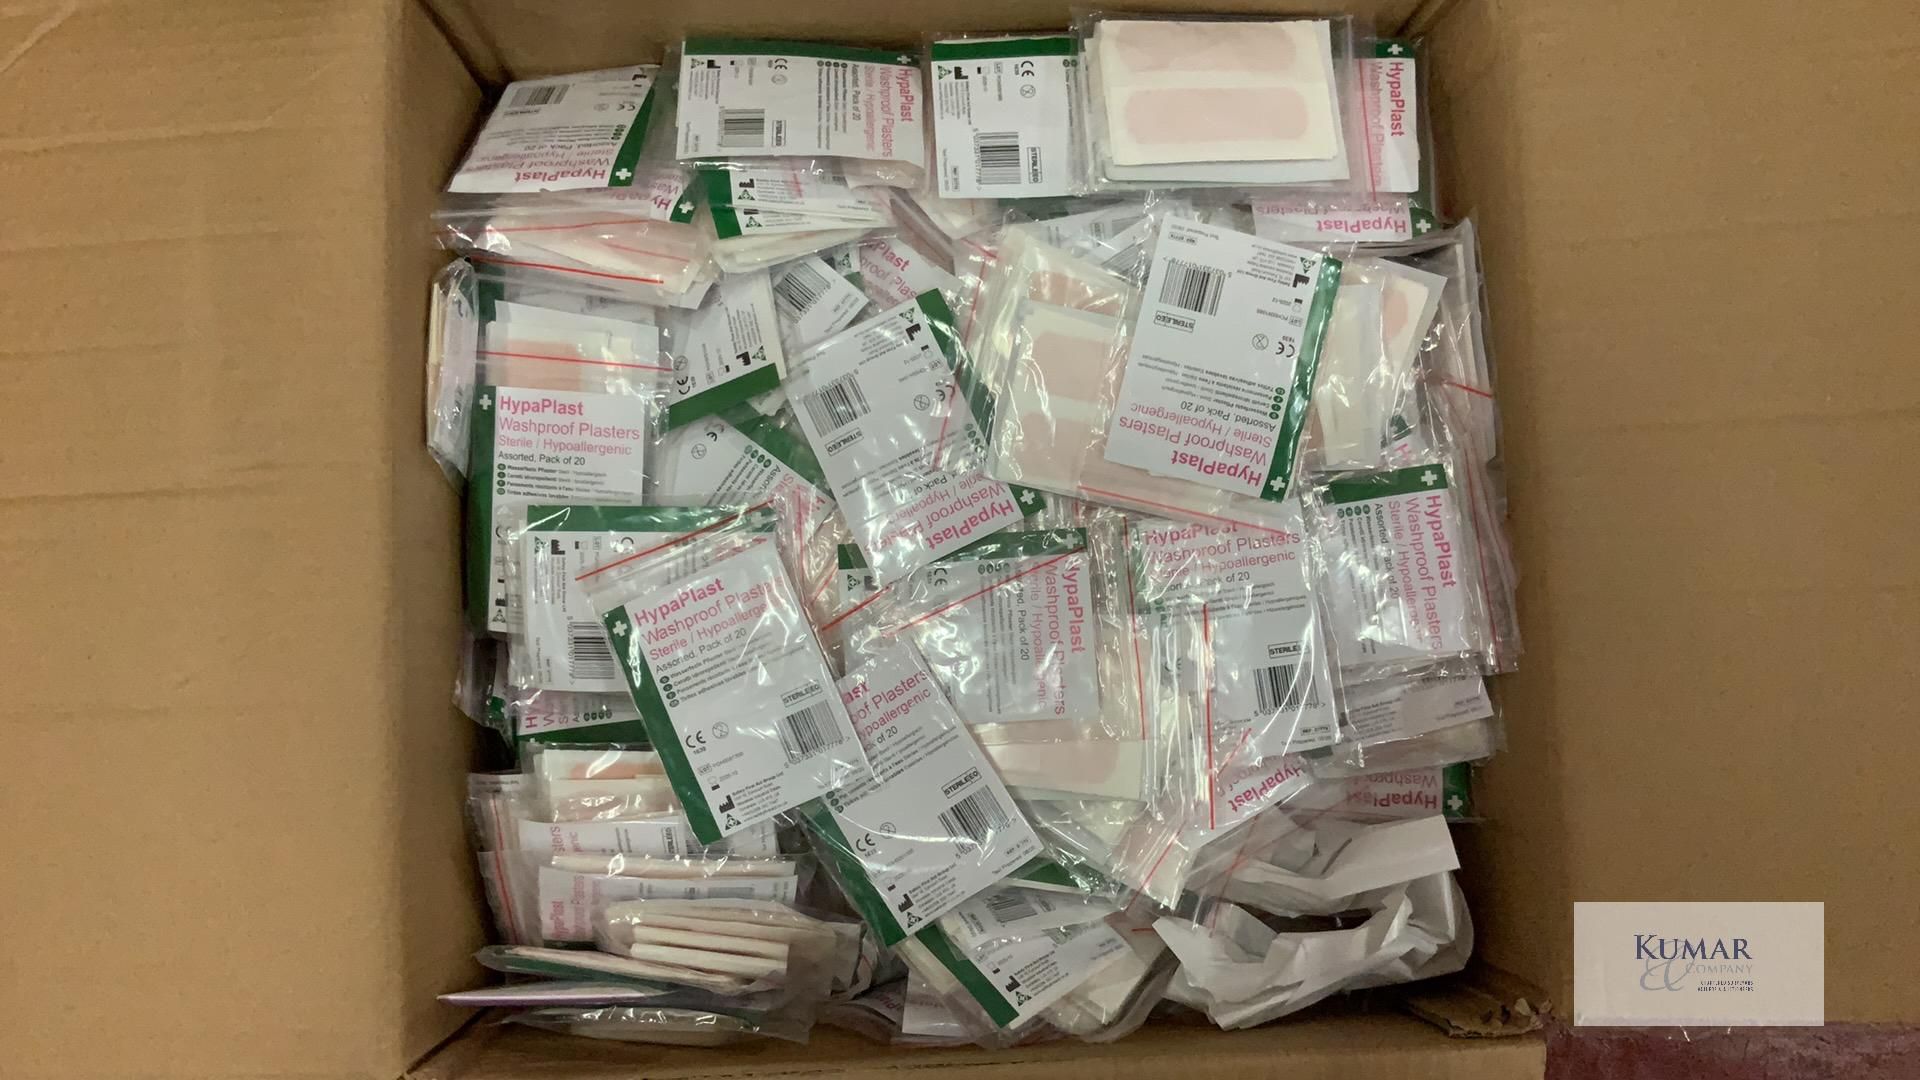 4: Large Boxes of 20 HypaPlast Sterile Washproof Assorted Plasters (10/2025) - Thousands of - Image 4 of 7